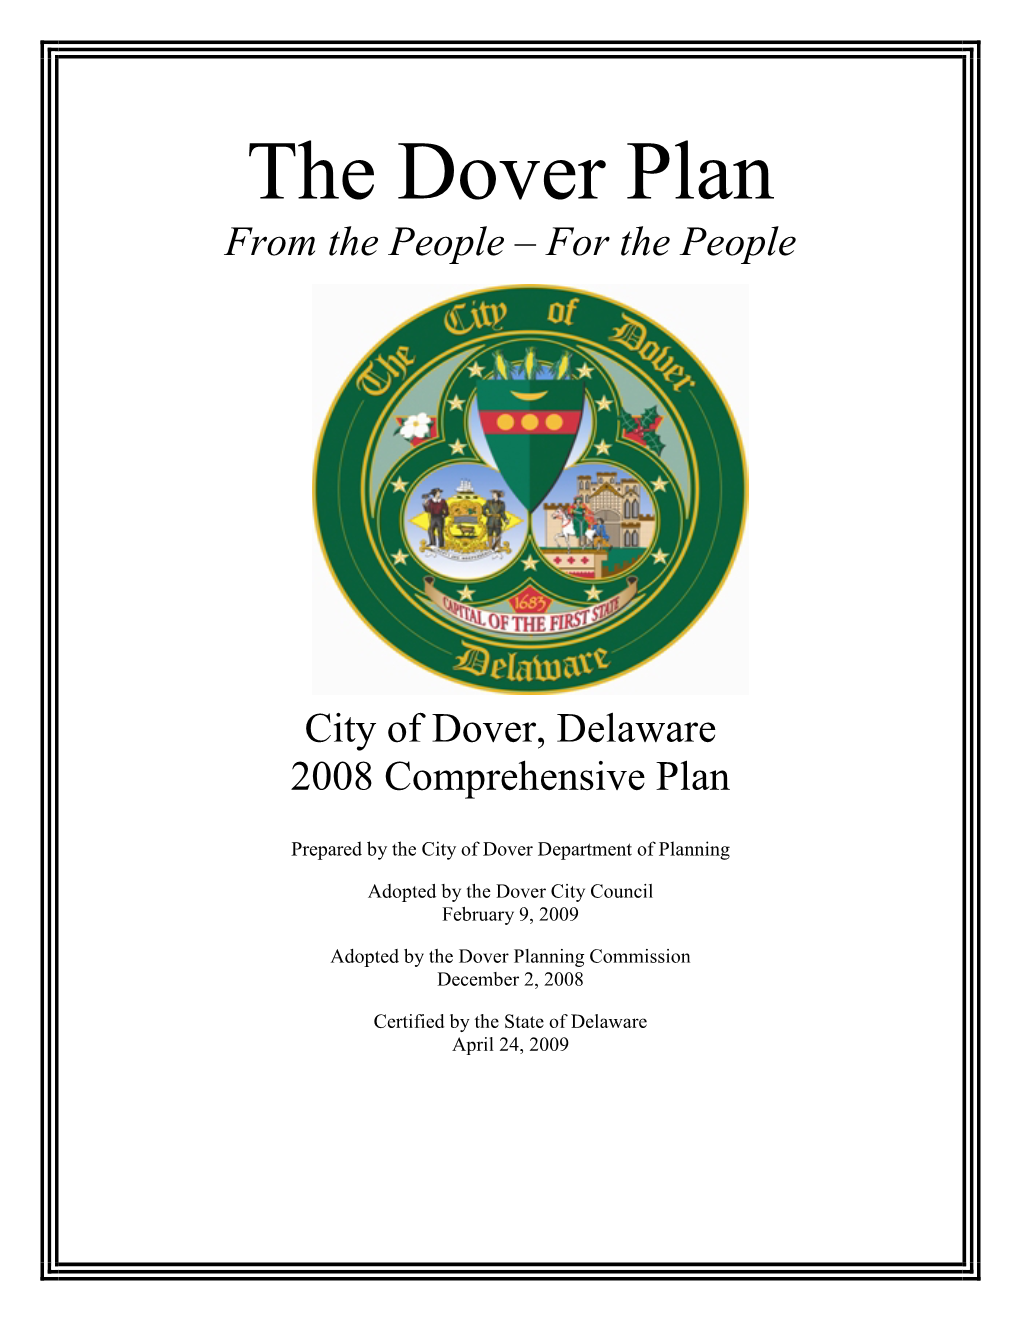 The Dover Plan from the People – for the People